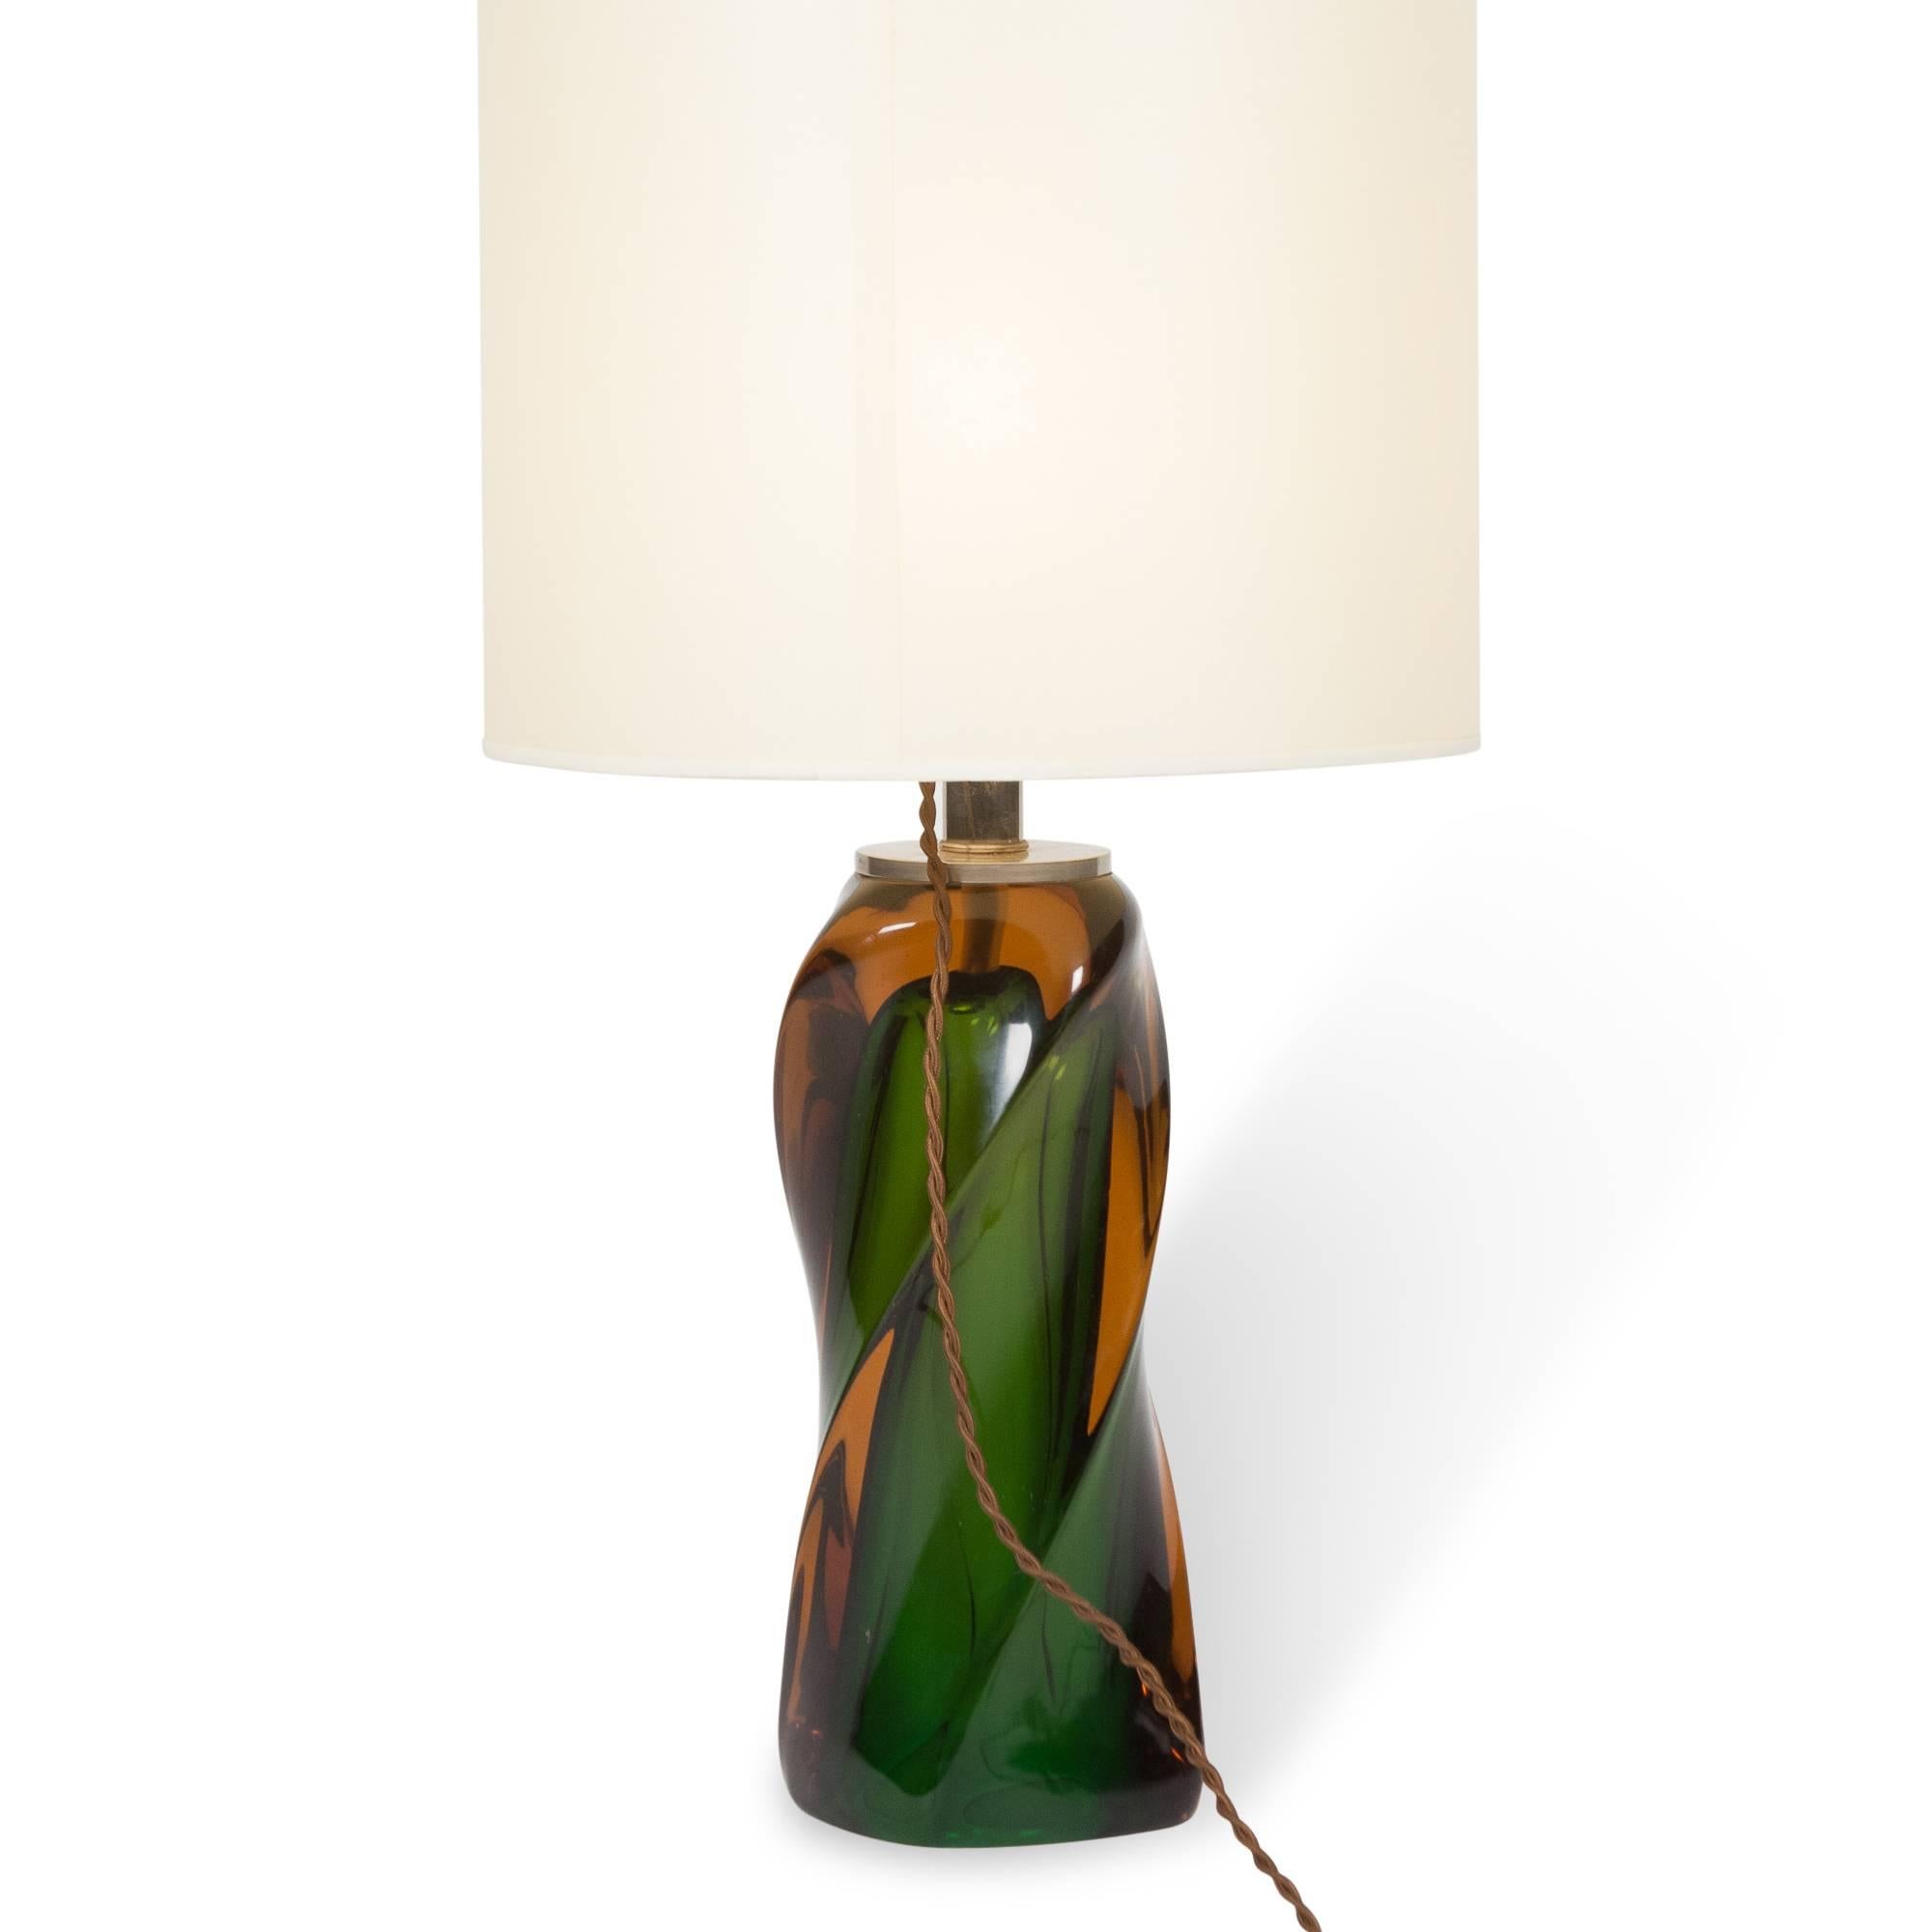 Green and red Sommerso glass table lamp of a gentle torsade form in custom silk shade by Fulvio Bianconi for Venini, Italian, 1950s. Measures: 4 in. D base, 14 in. D shade at widest, 27 in. H.
  